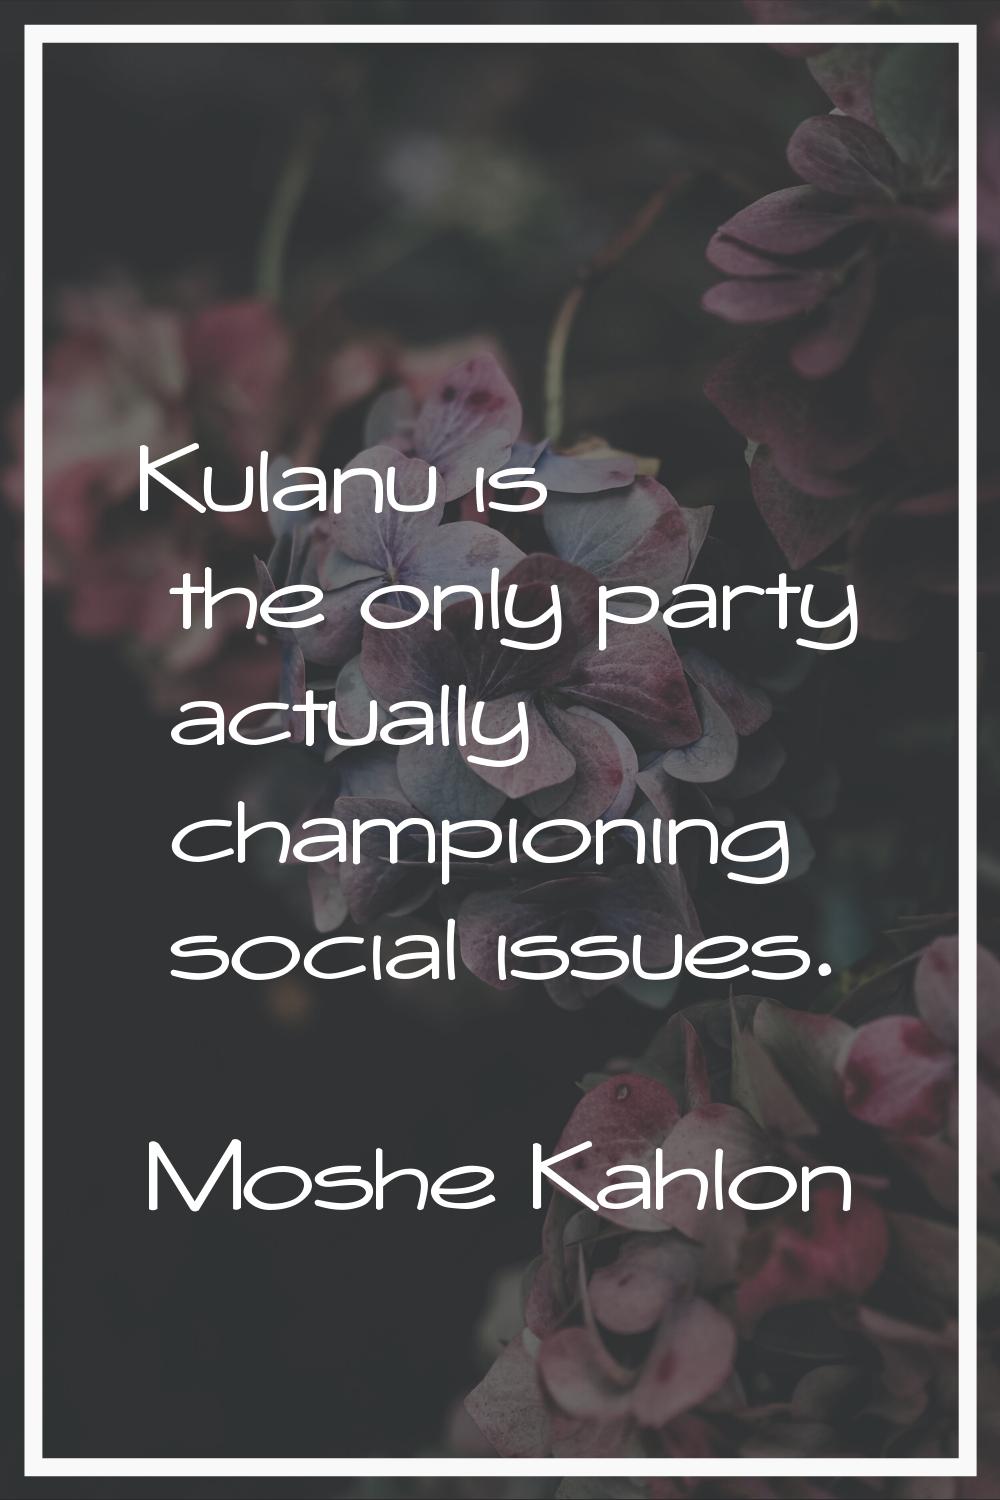 Kulanu is the only party actually championing social issues.